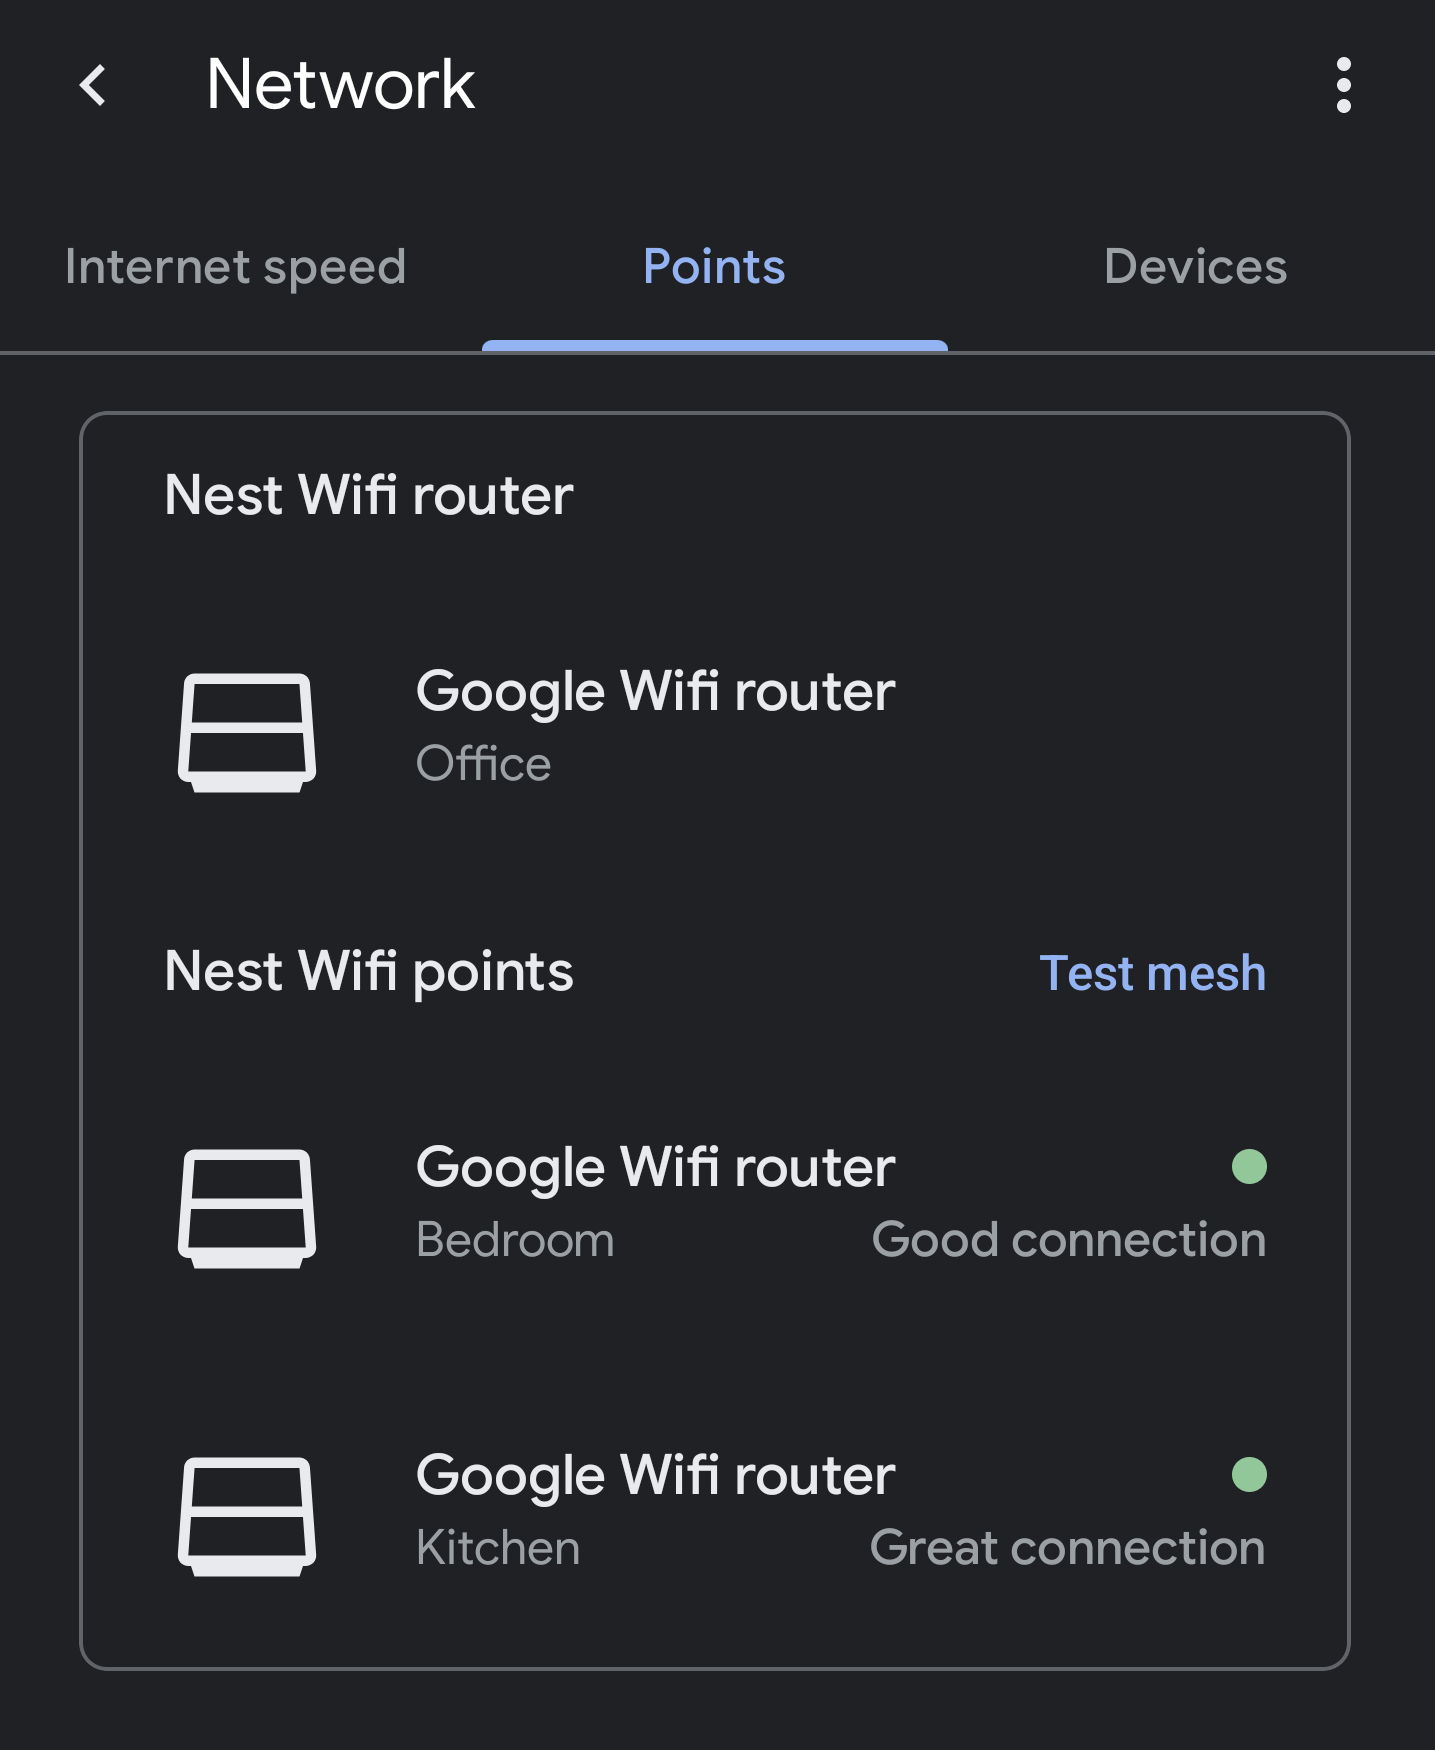 My routers